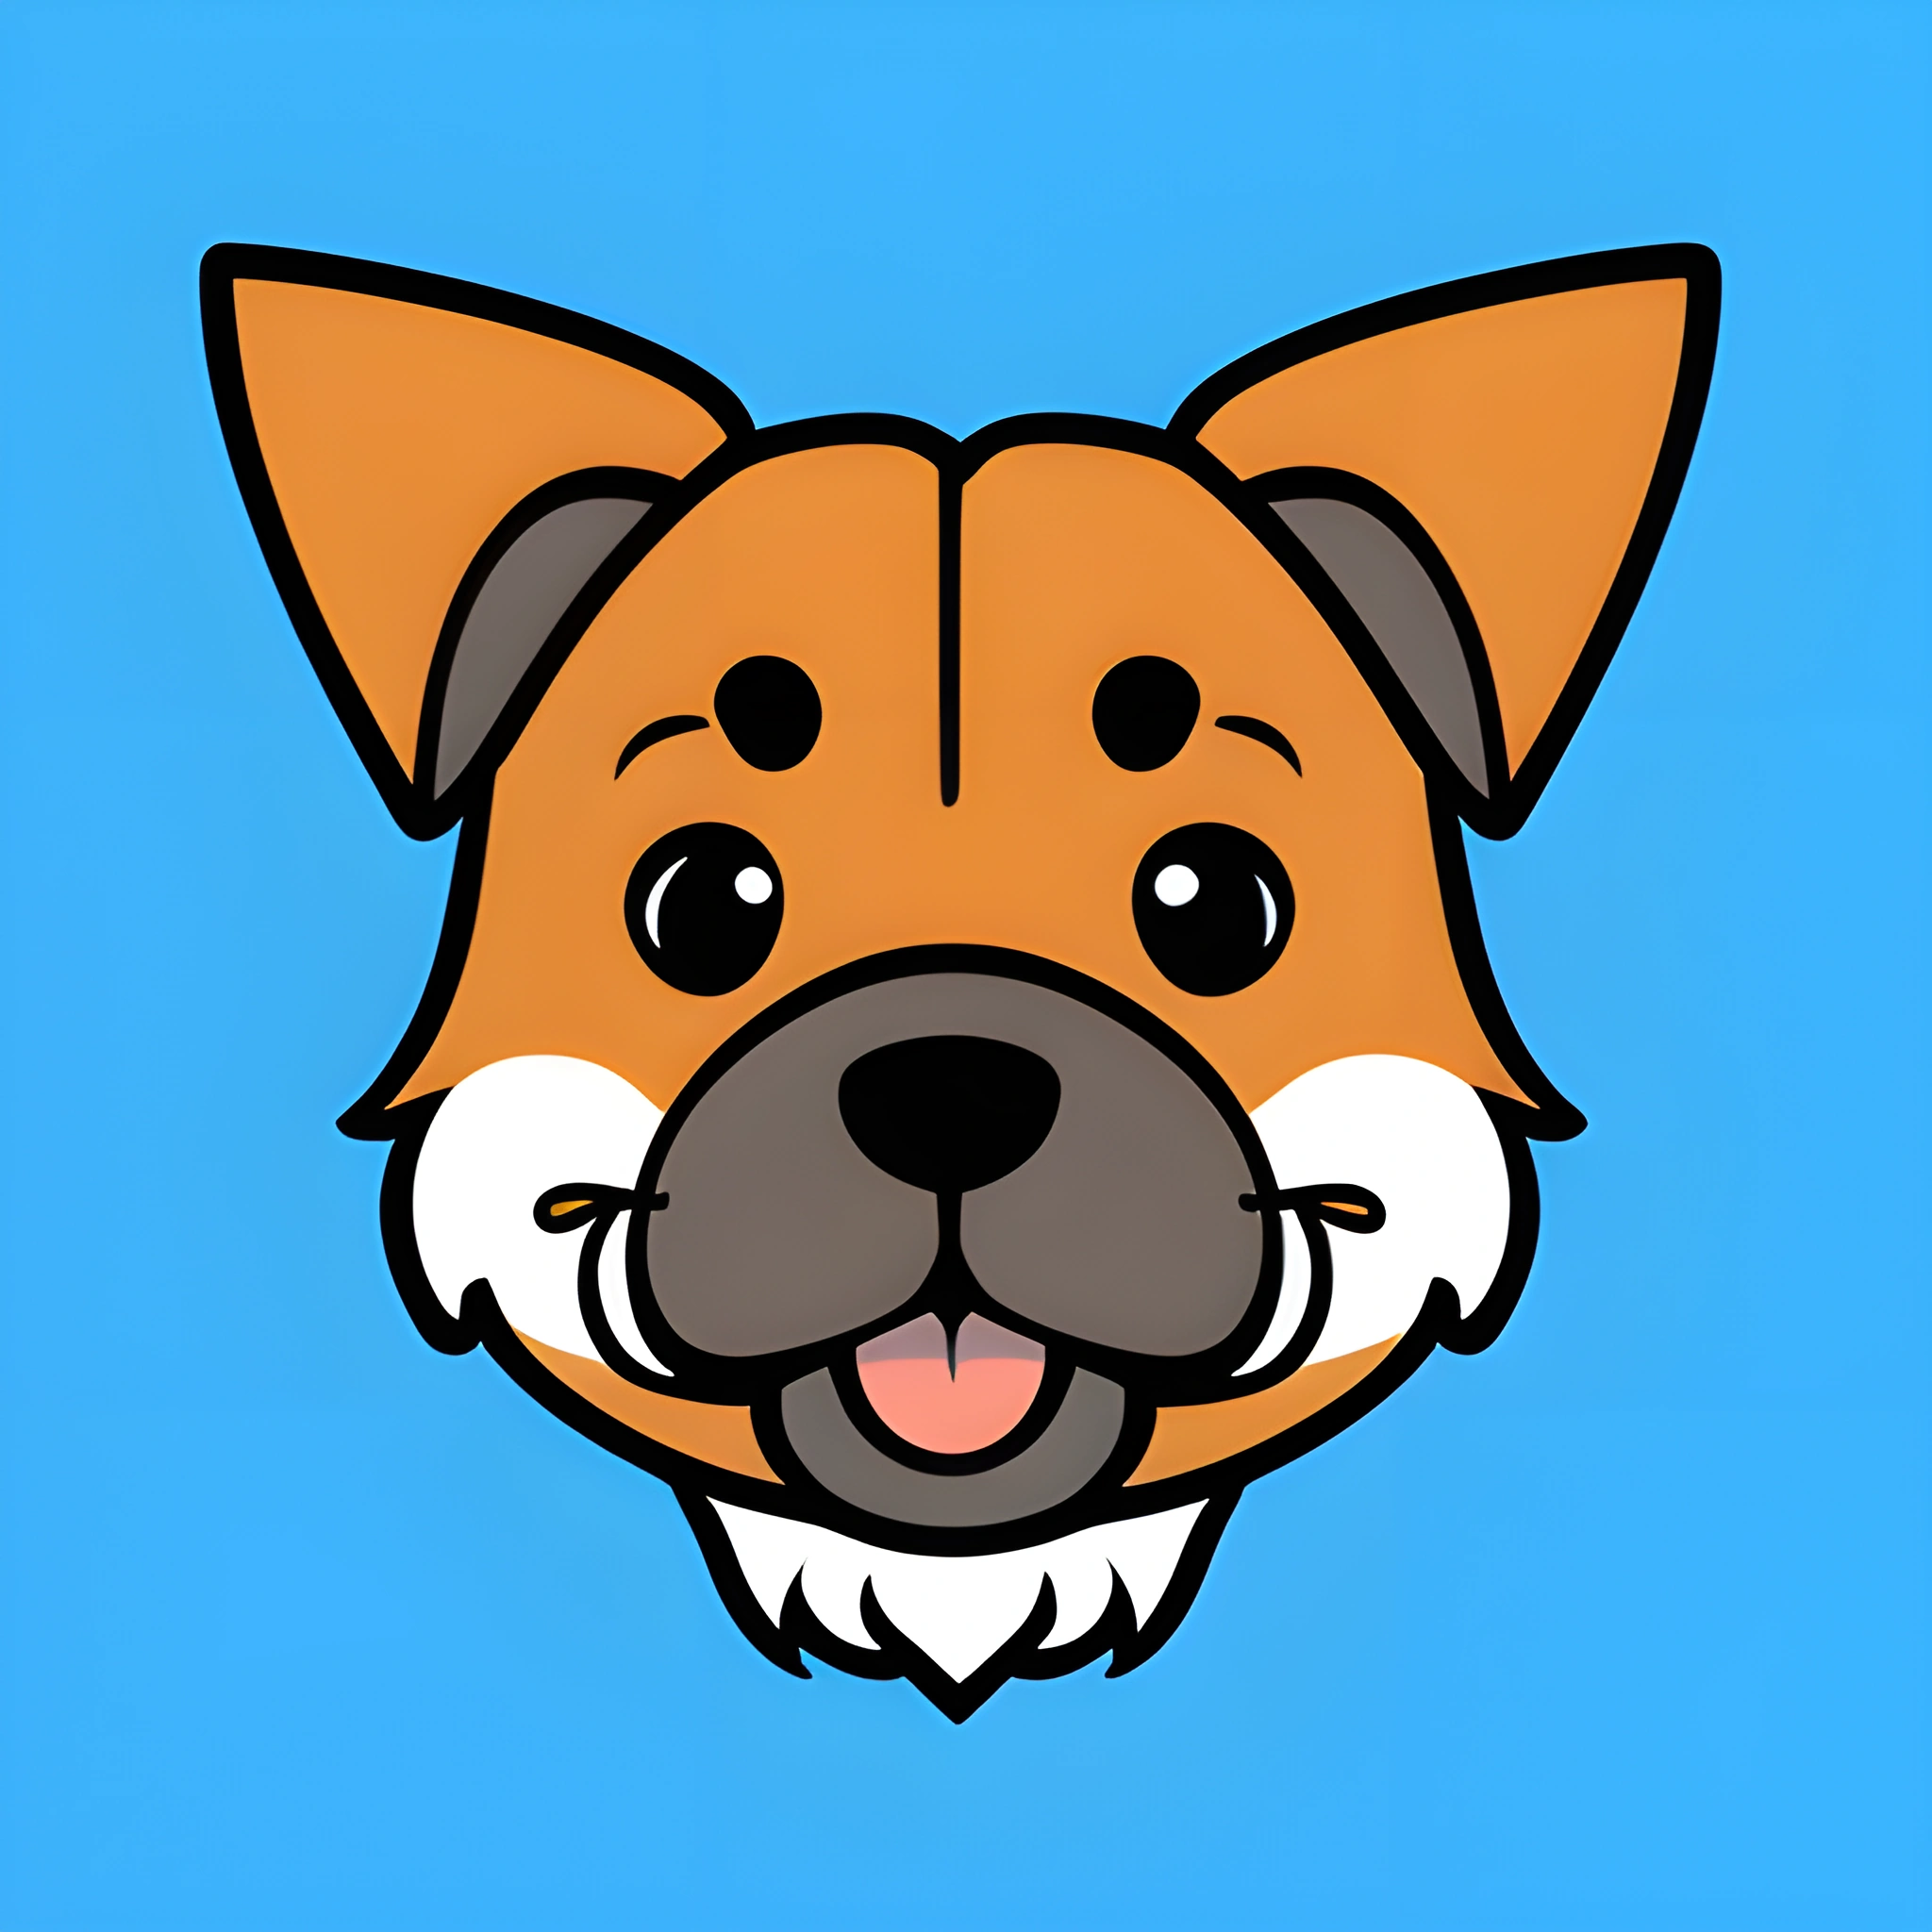 cartoon dog with a big smile on a blue background